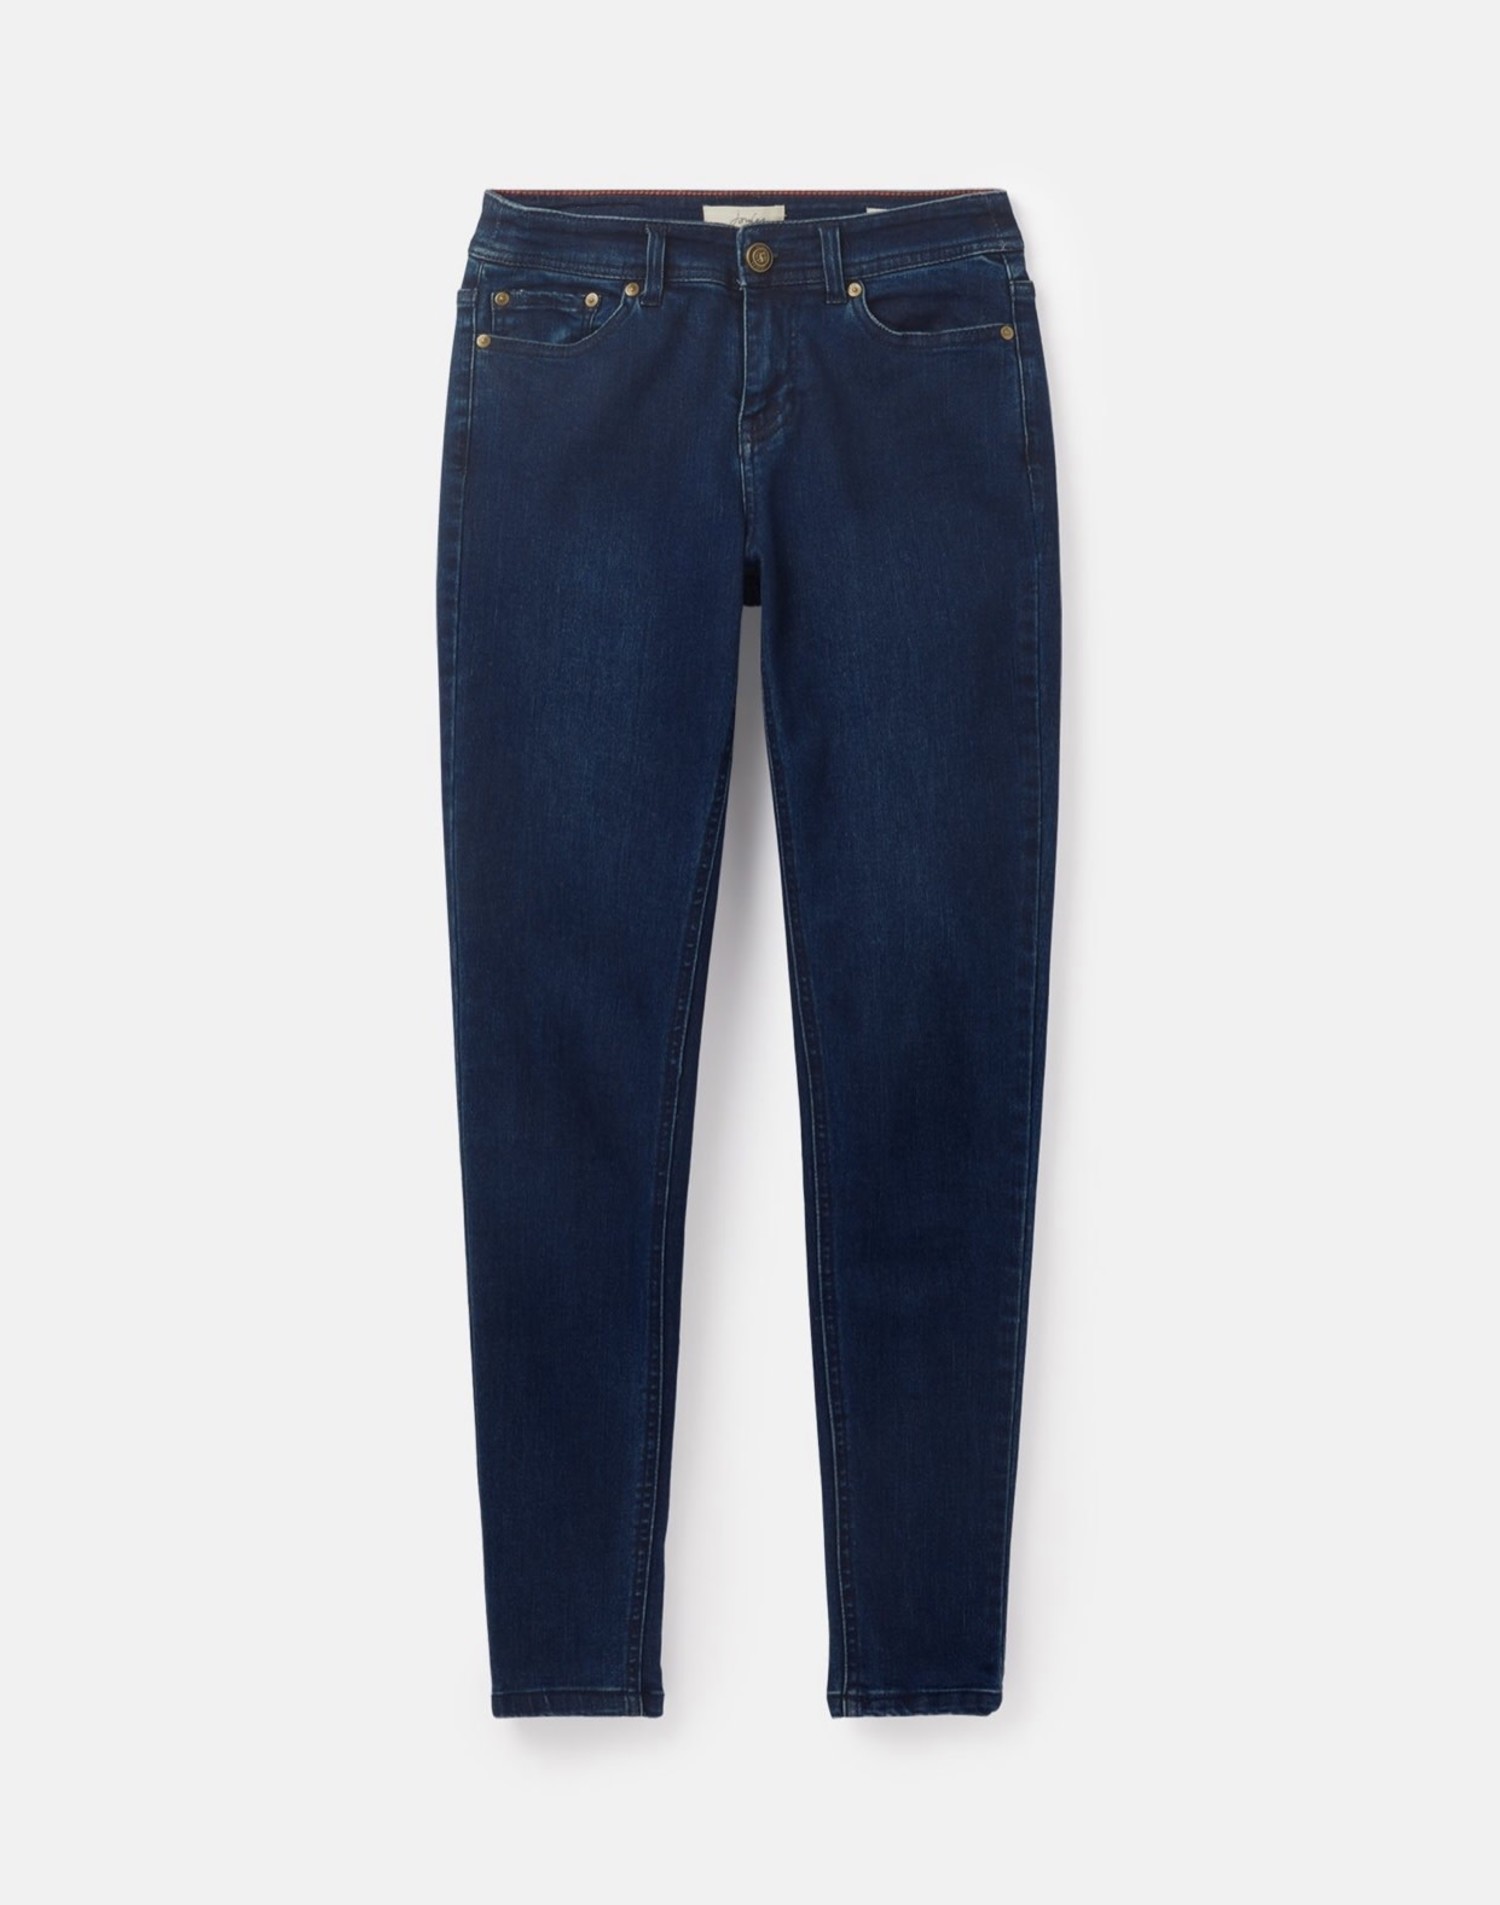 Buy Joules Monroe High Rise Stretch Skinny Jeans from the Joules